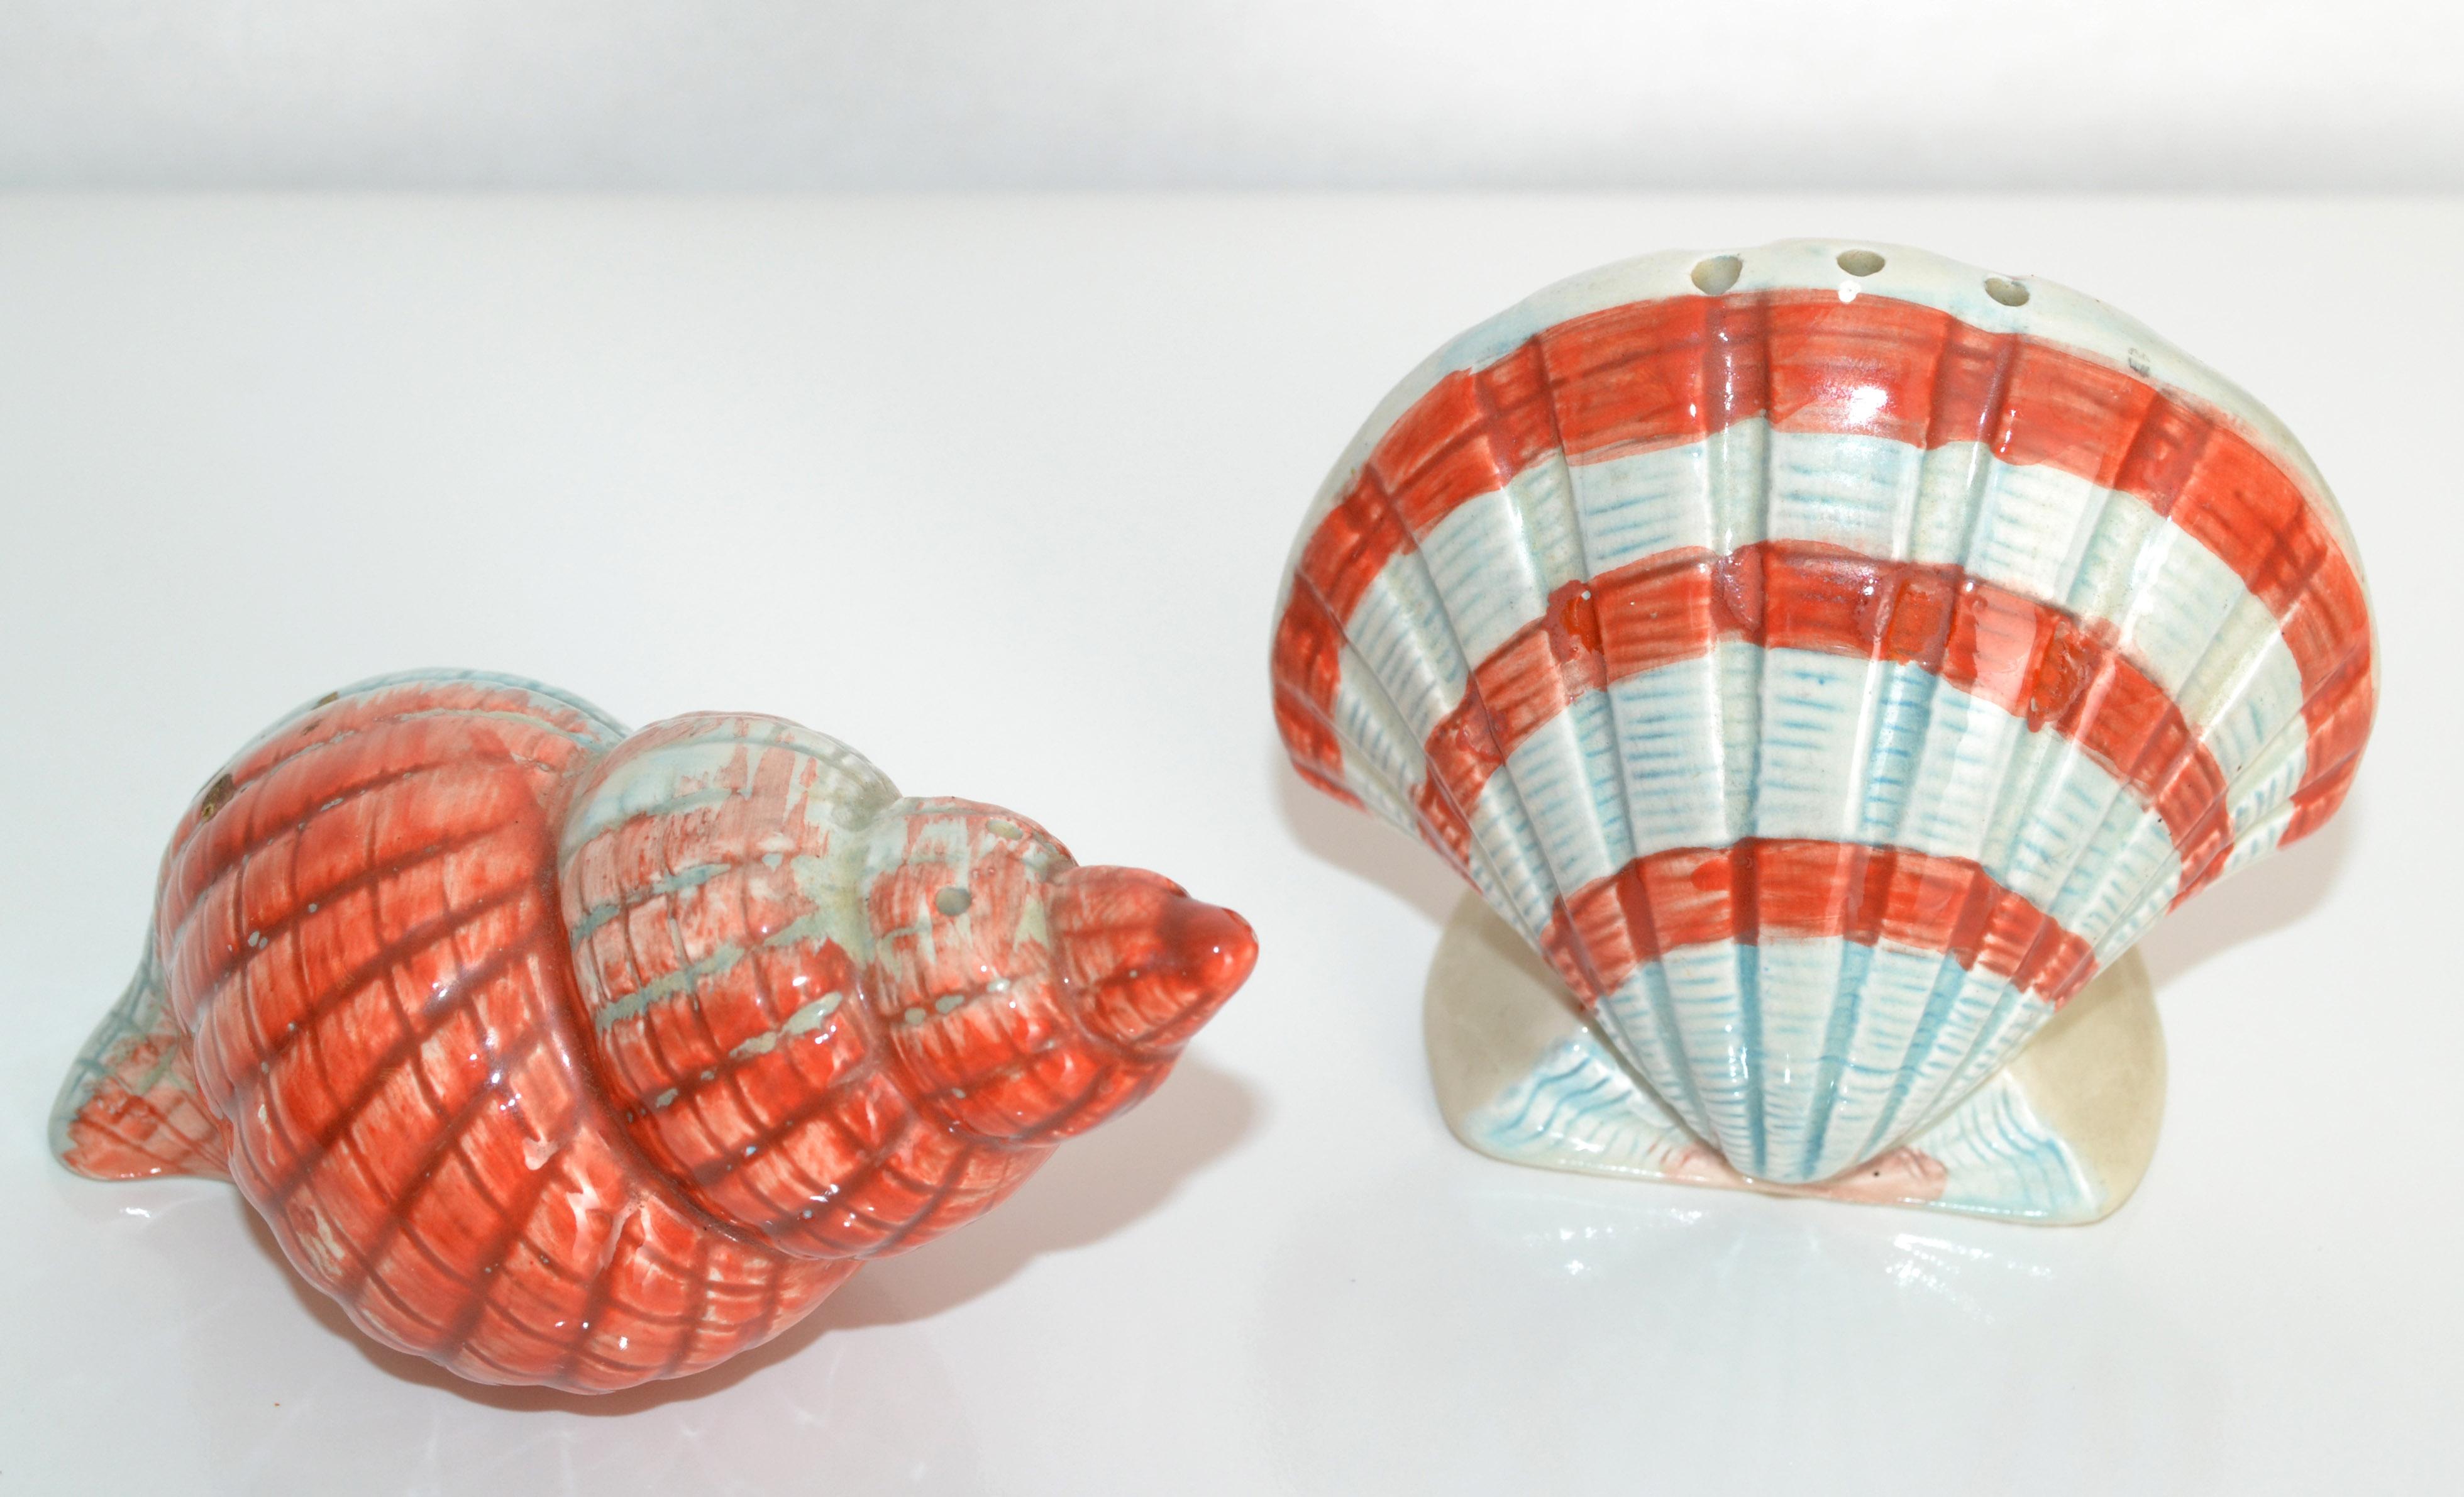 Mid-Century Modern ceramic seashell shaped set of salt and pepper shakers, bar and tableware made in America in the 1980s.
Hand-painted and hand-crafted and it is a nautical Collectors Set for any Table Setting.
Plastic Stopper for easy Refills at